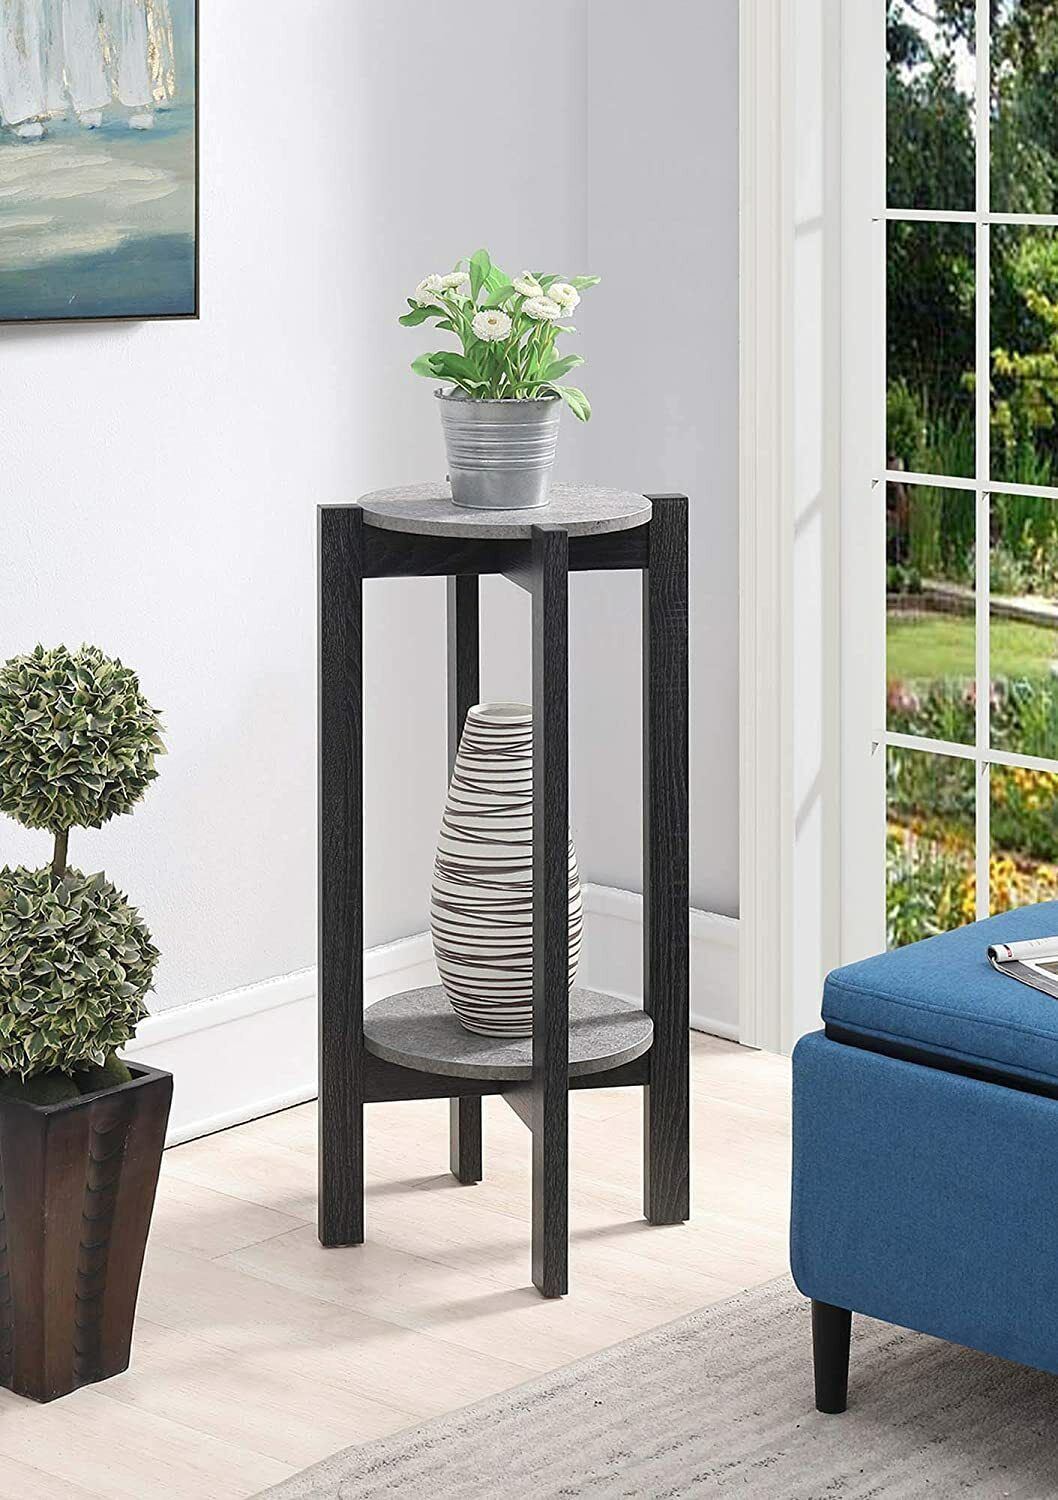 Convenience Concepts Newport Deluxe Plant Stand | Ebay For Deluxe Plant Stands (View 4 of 15)